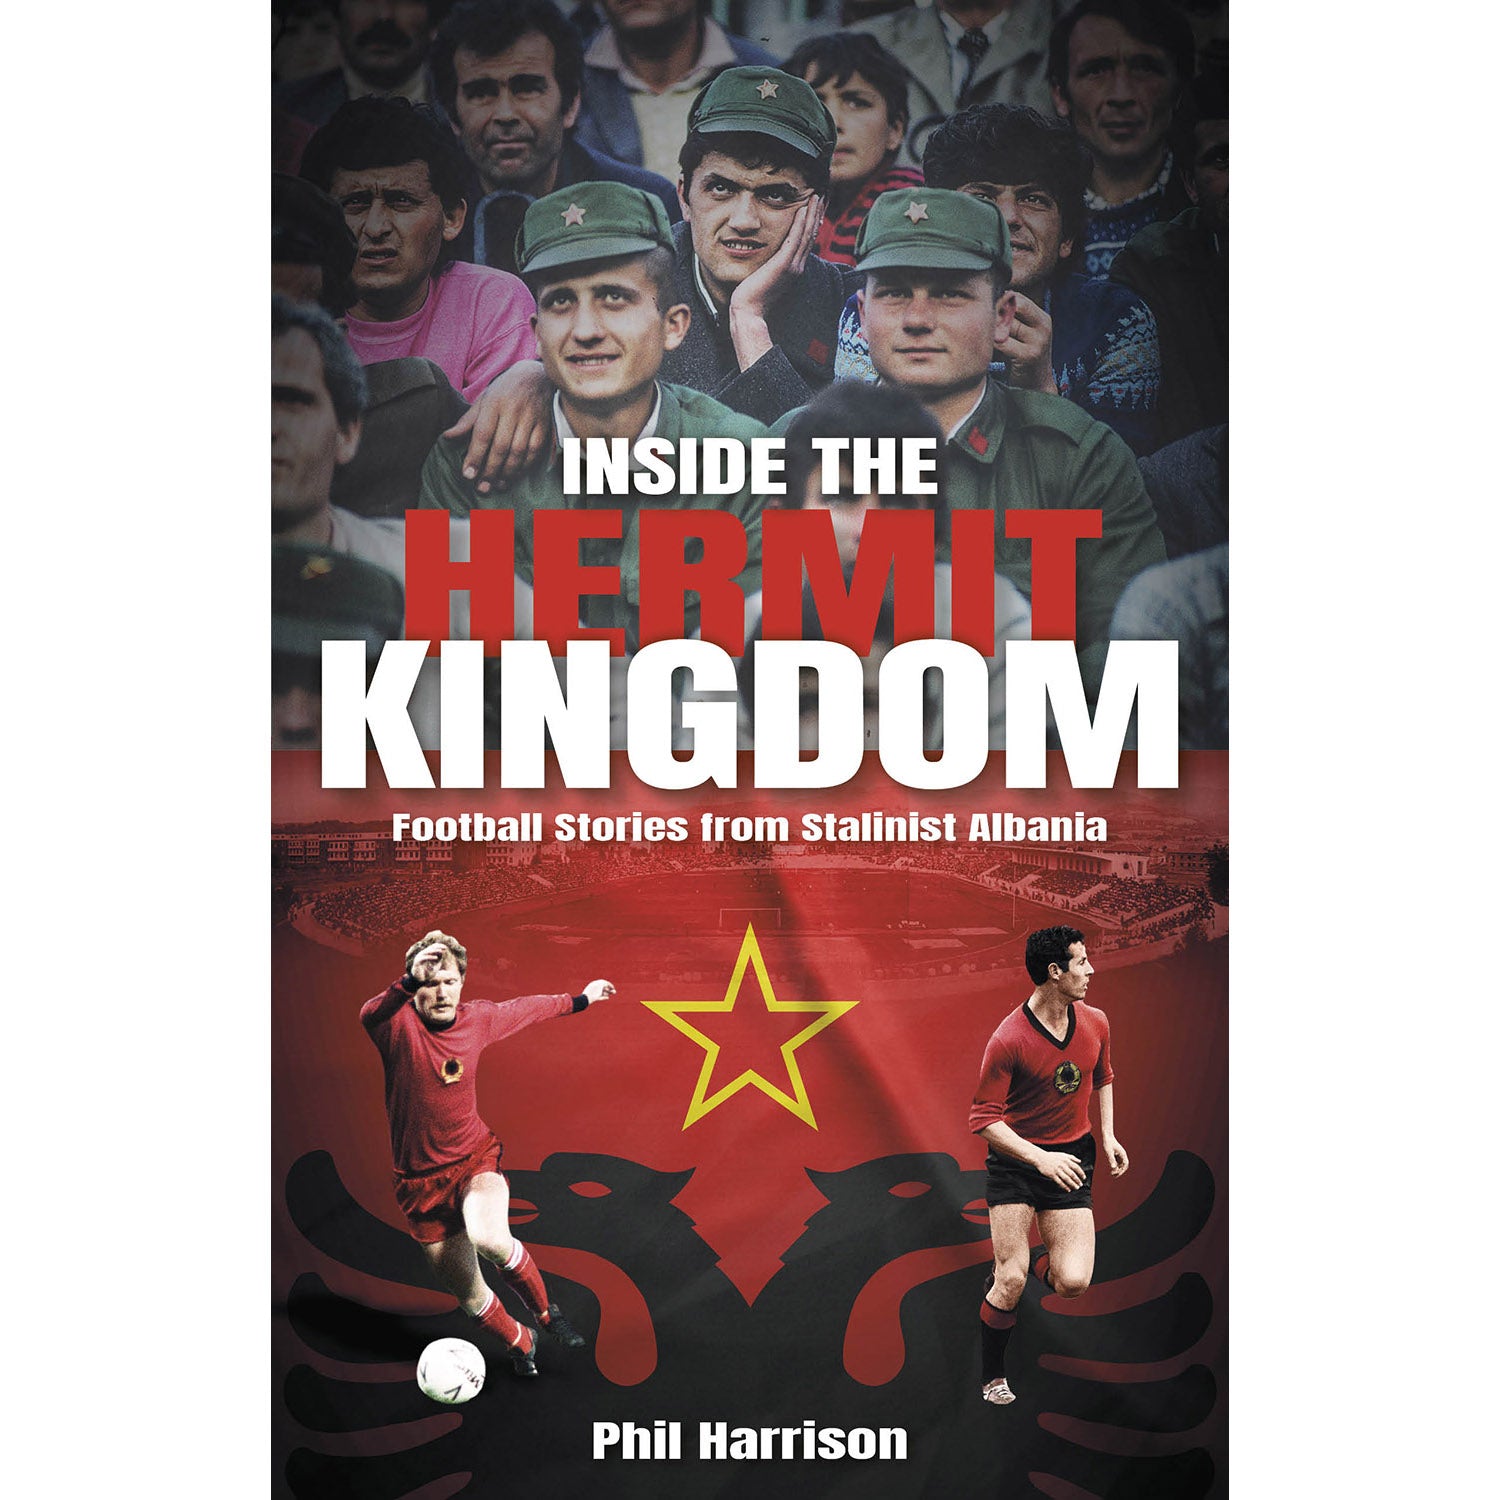 Inside the Hermit Kingdom – Football Stories from Stalinist Albania